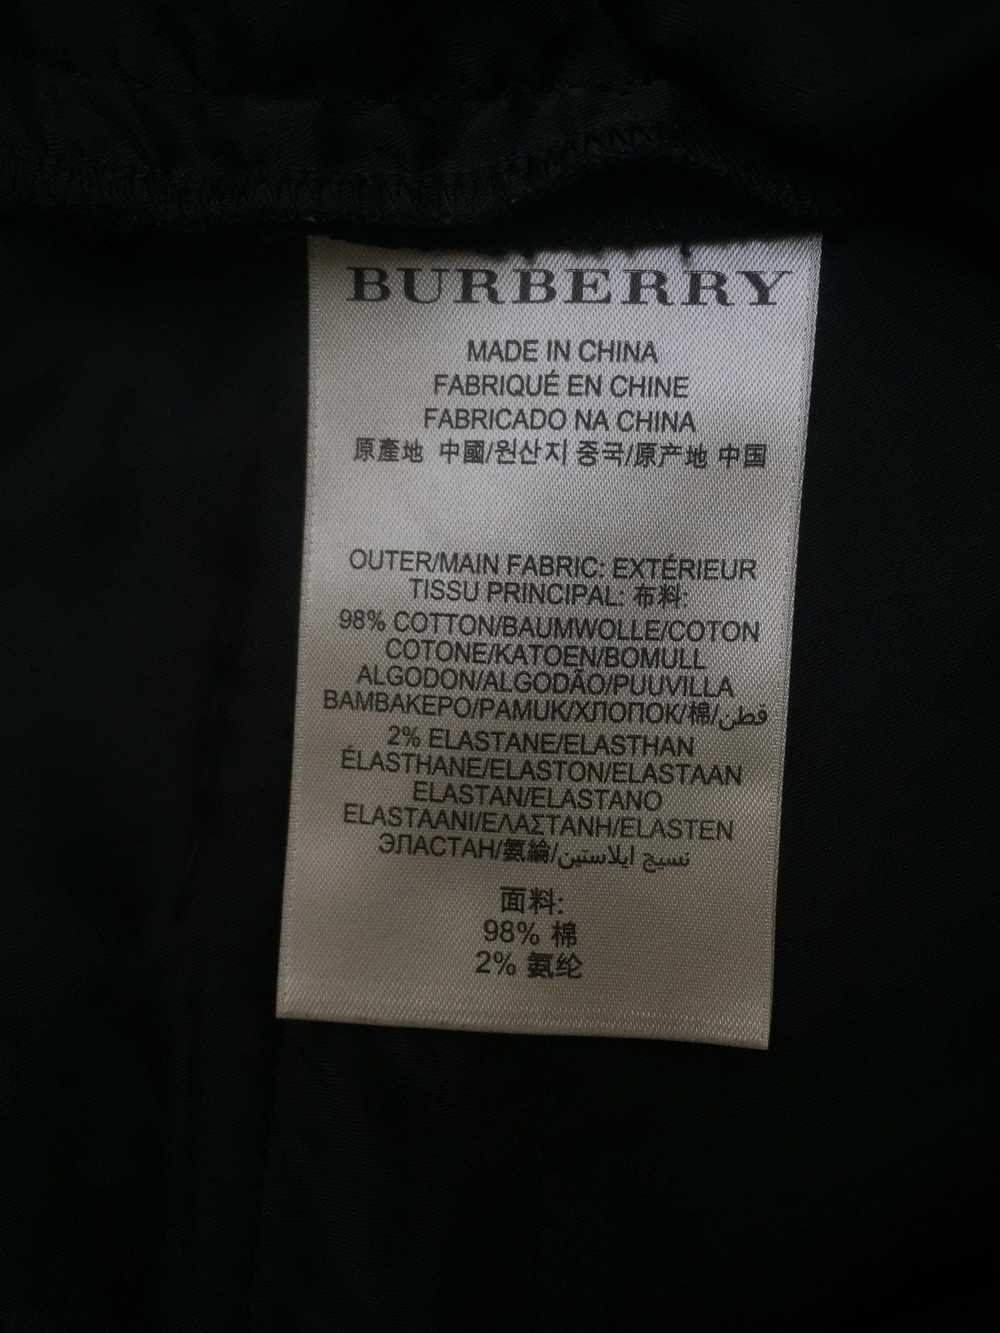 Burberry Burberry Trousers - image 3